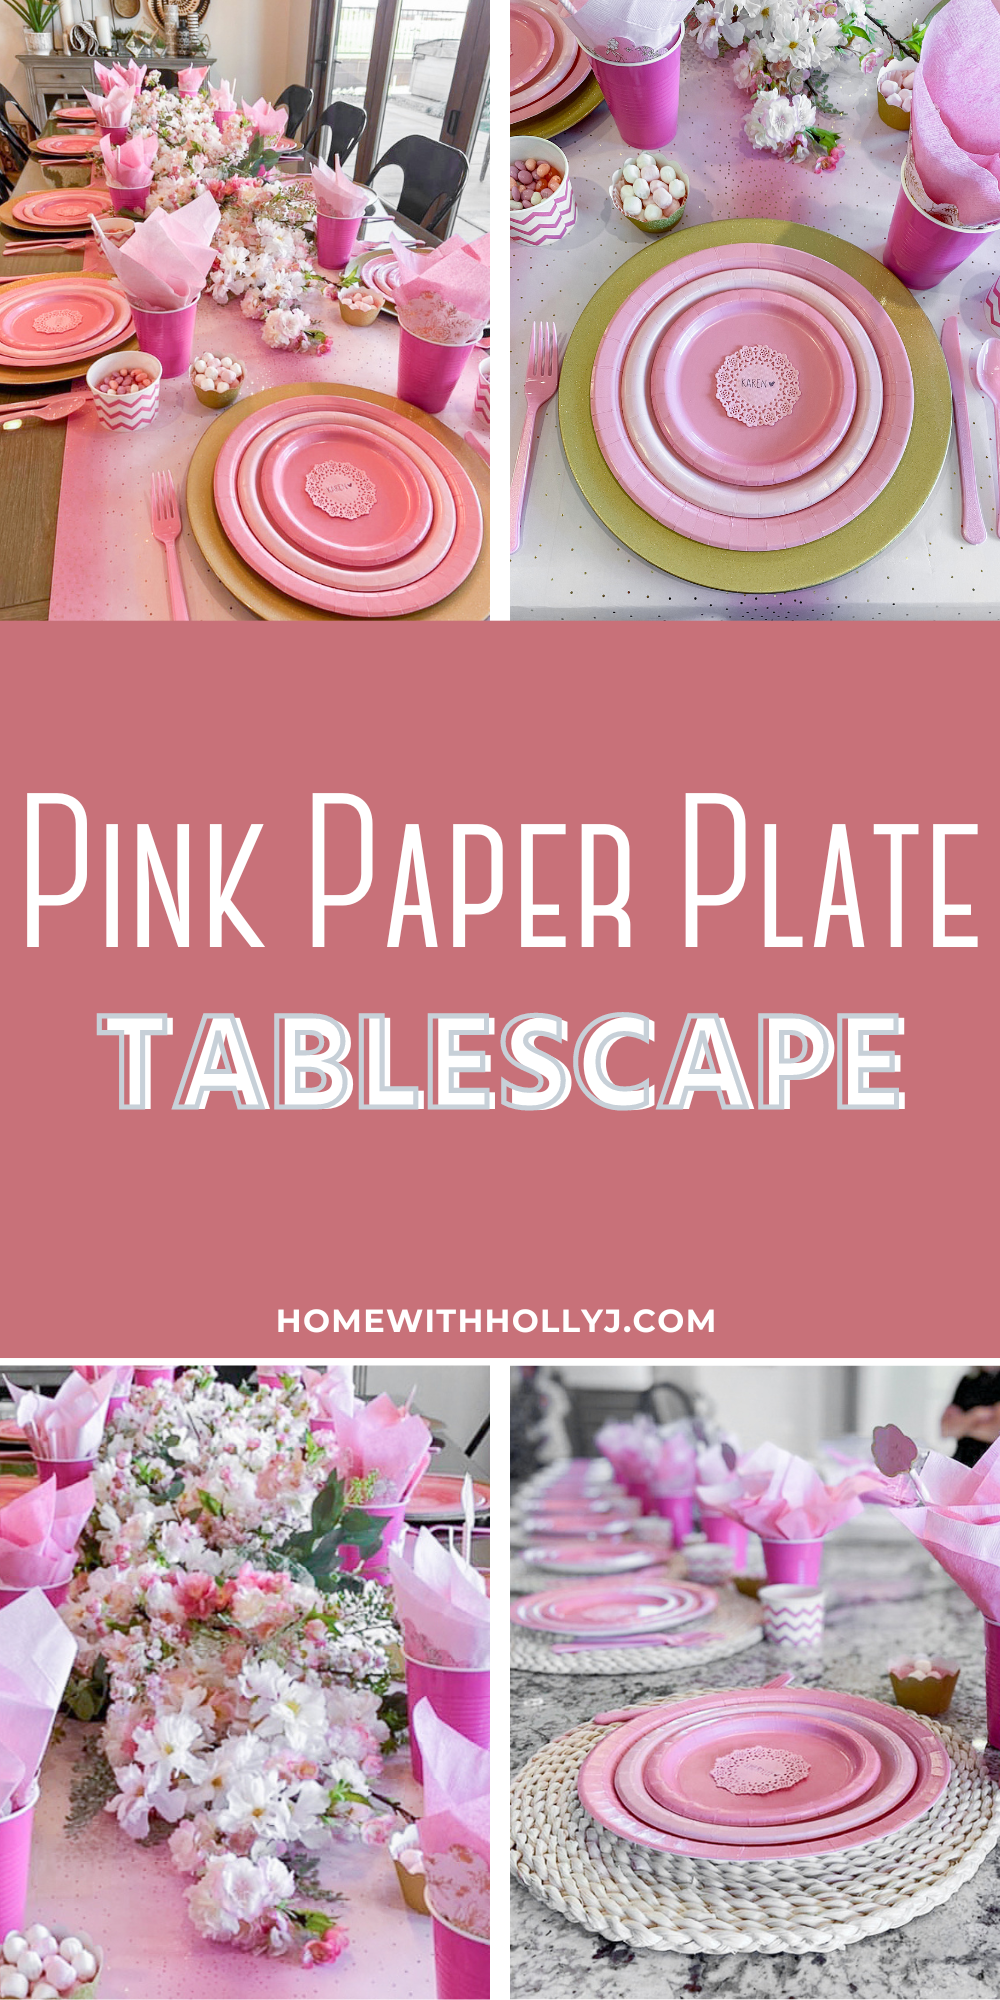 You don't need fancy china to set a beautiful table. Elevate our dining experience with a pink paper plate tablescape. Check it out now.